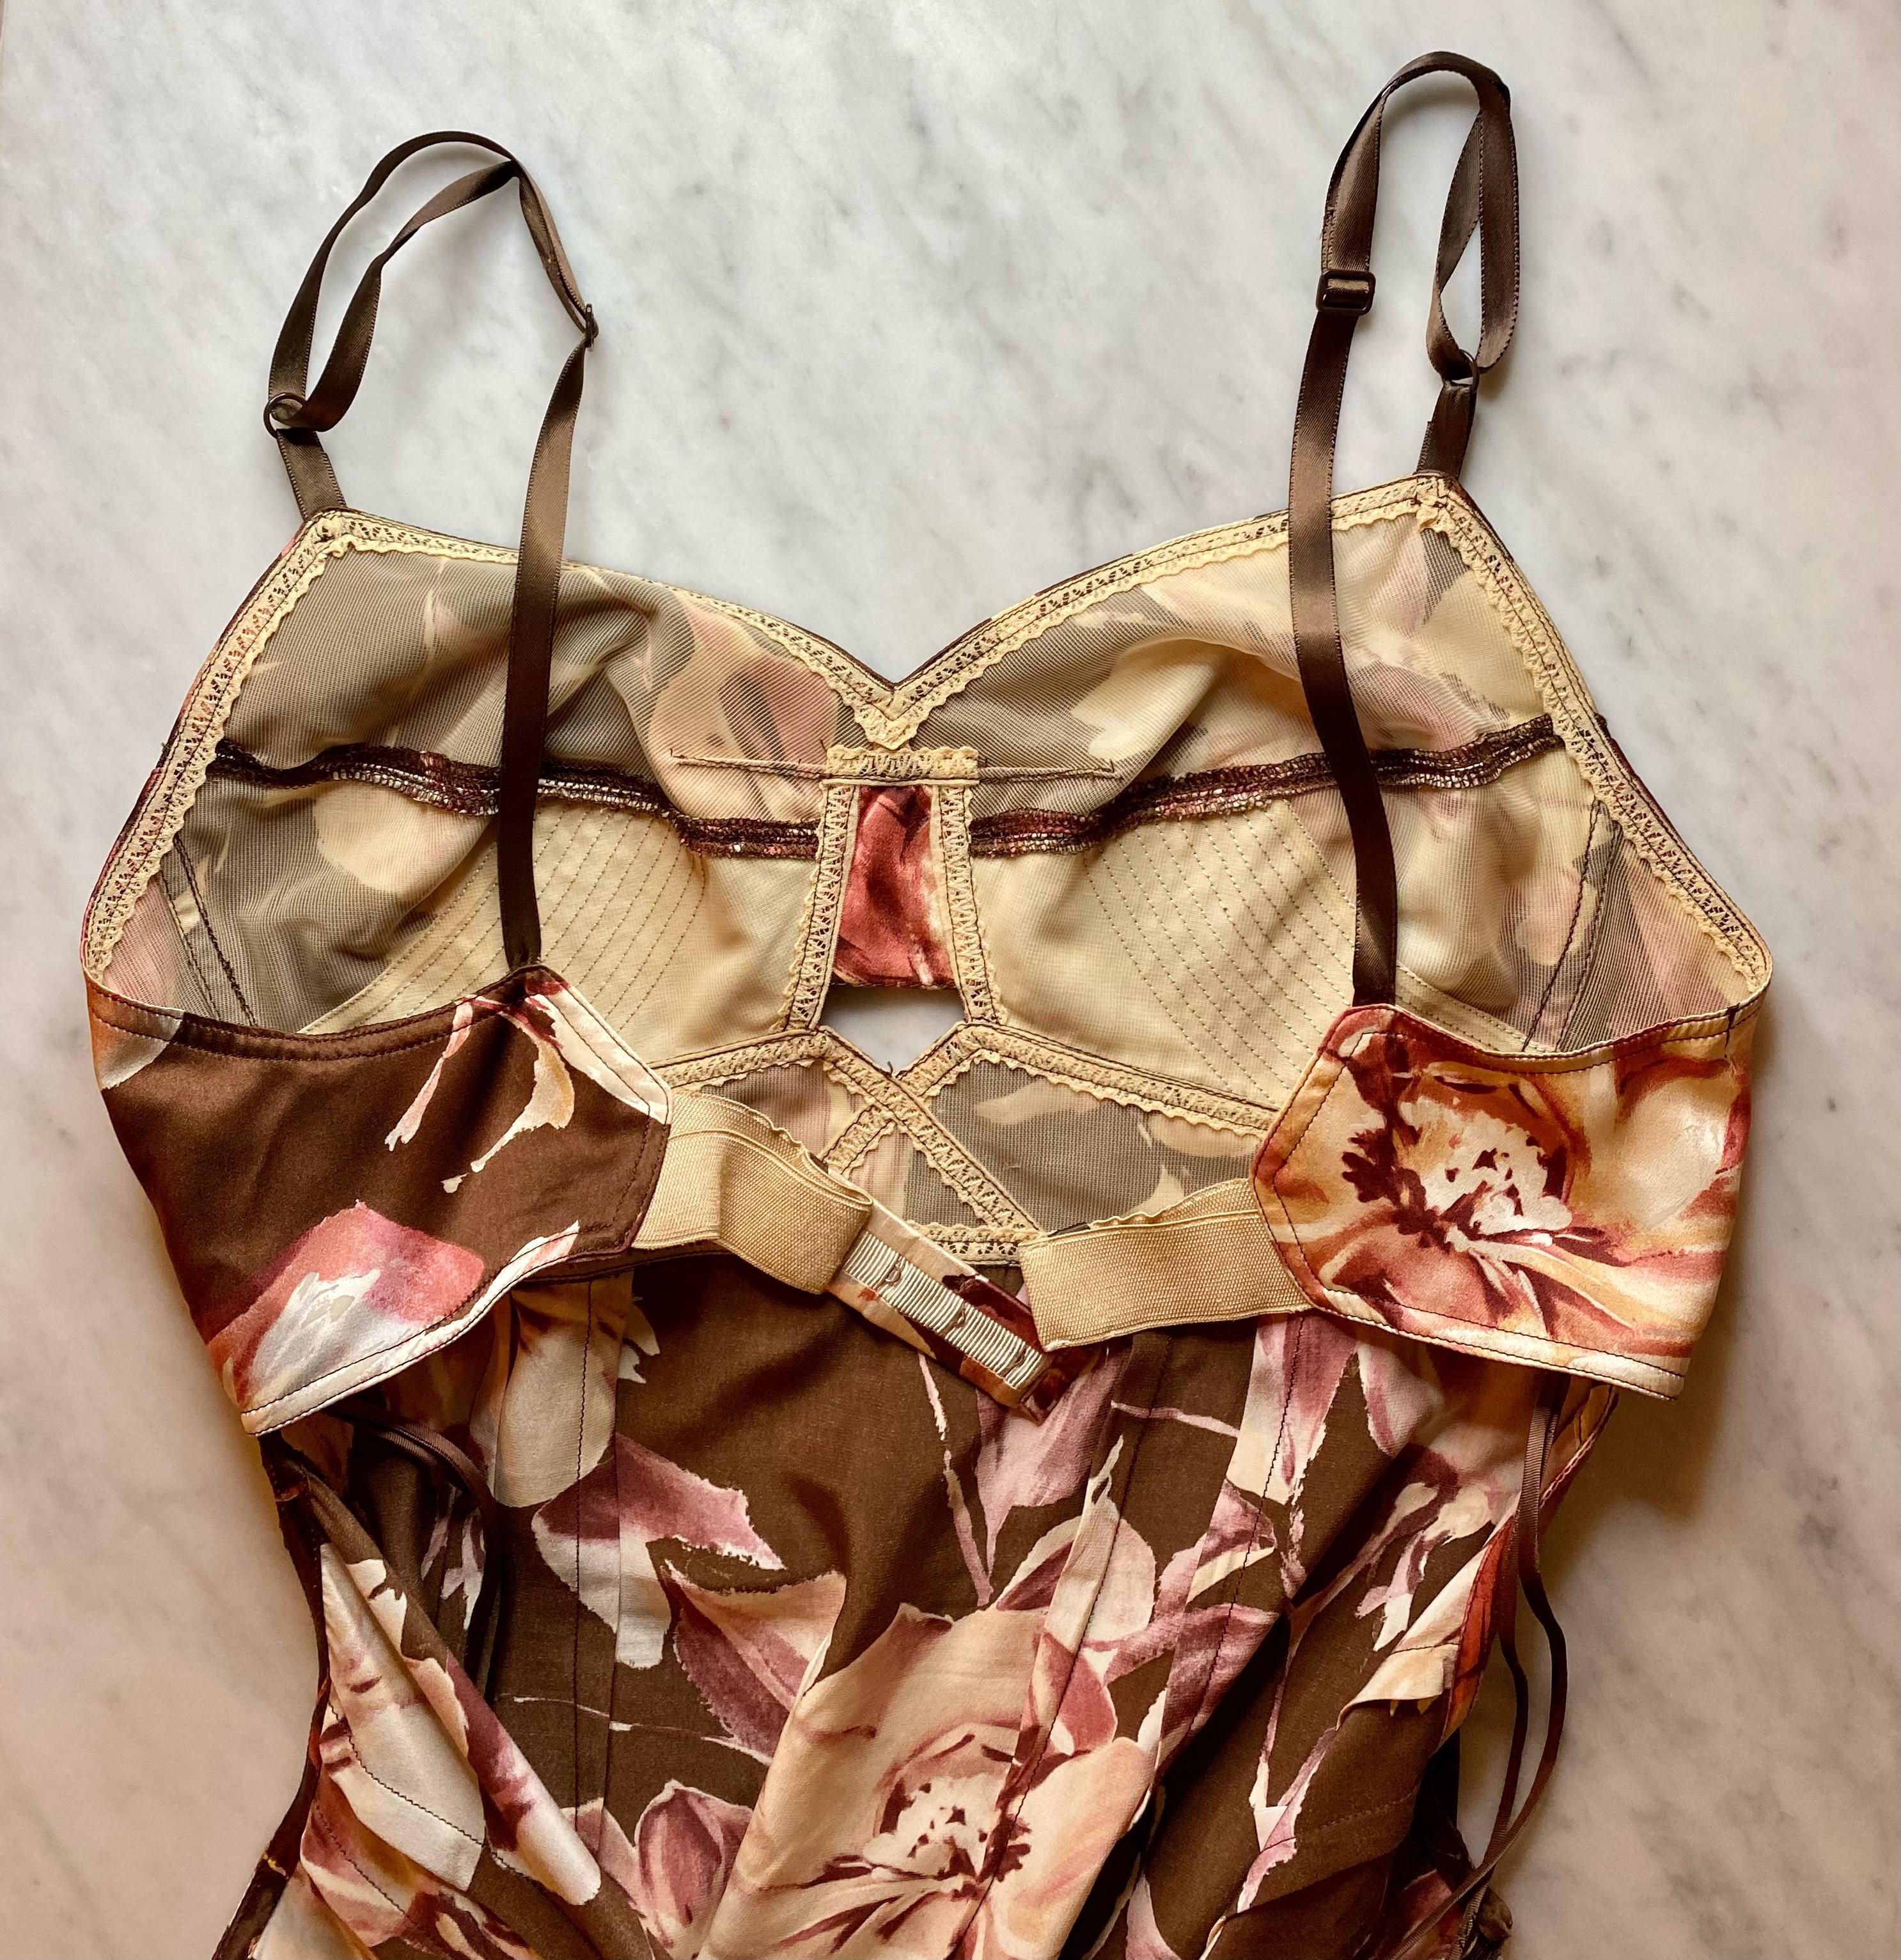 S/S 1997 Dolce & Gabbana Floral Brown Silk Bustier Strap Pin-Up Dress In Excellent Condition For Sale In West Hollywood, CA